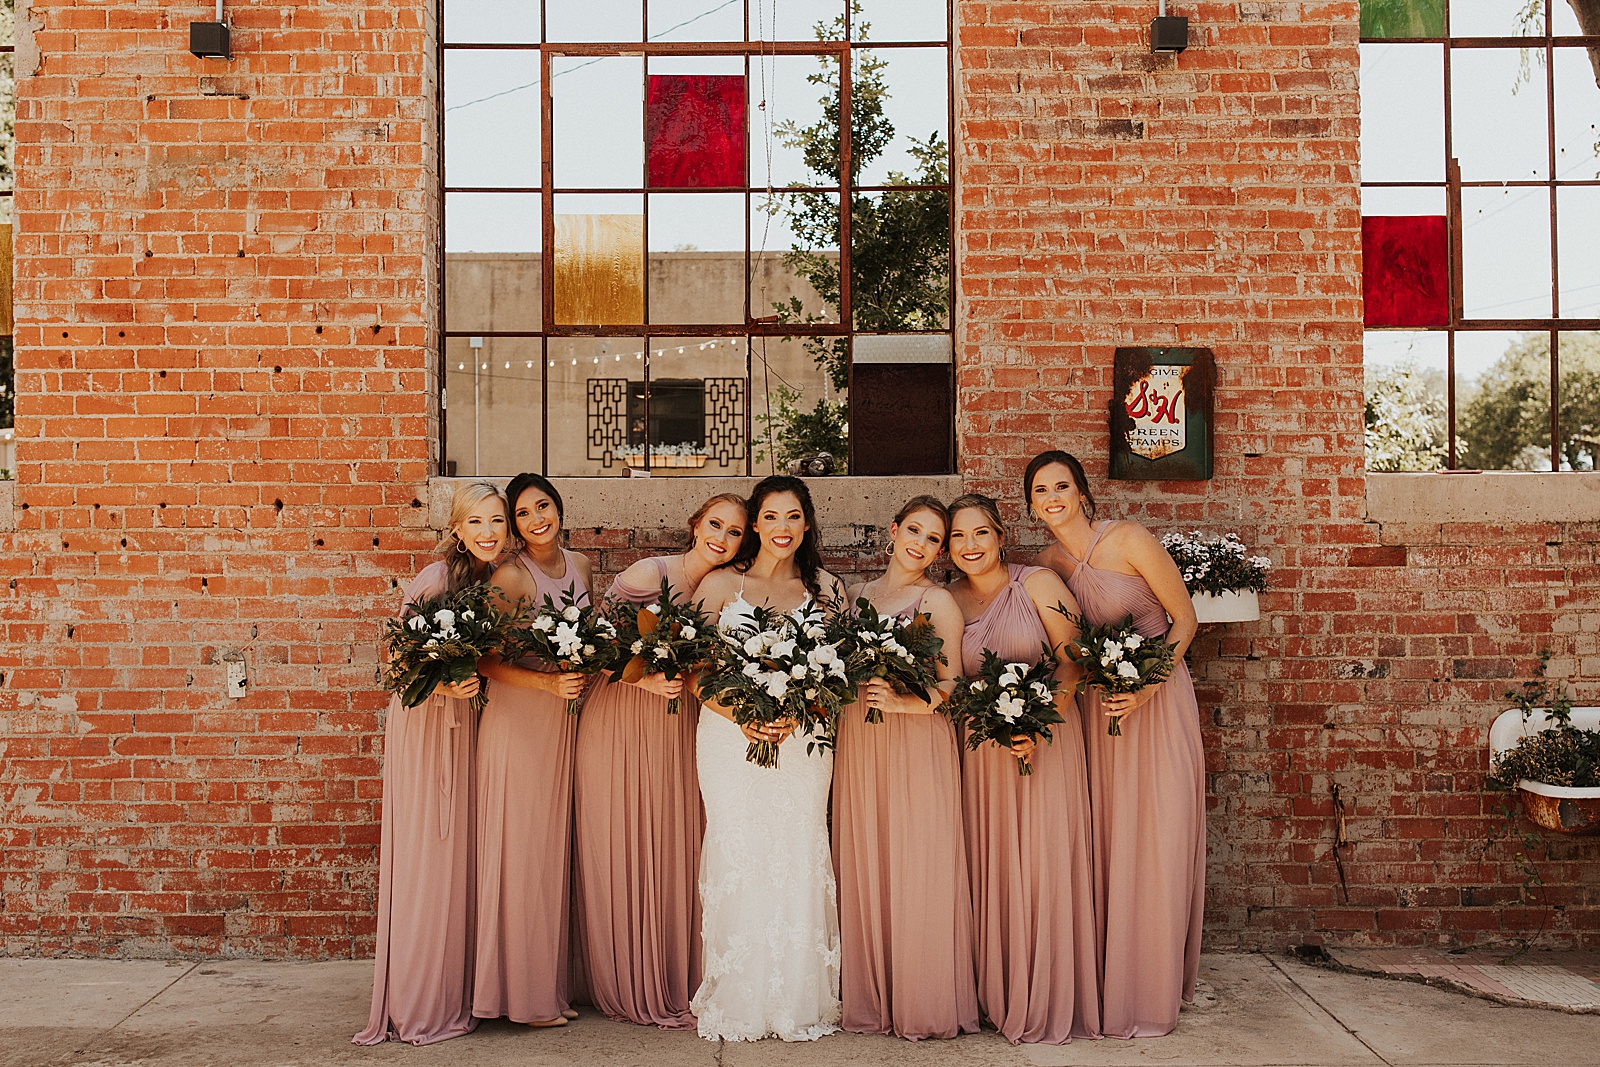 A bridal party wedding photo at the Soda District Courtyard in Abilene.